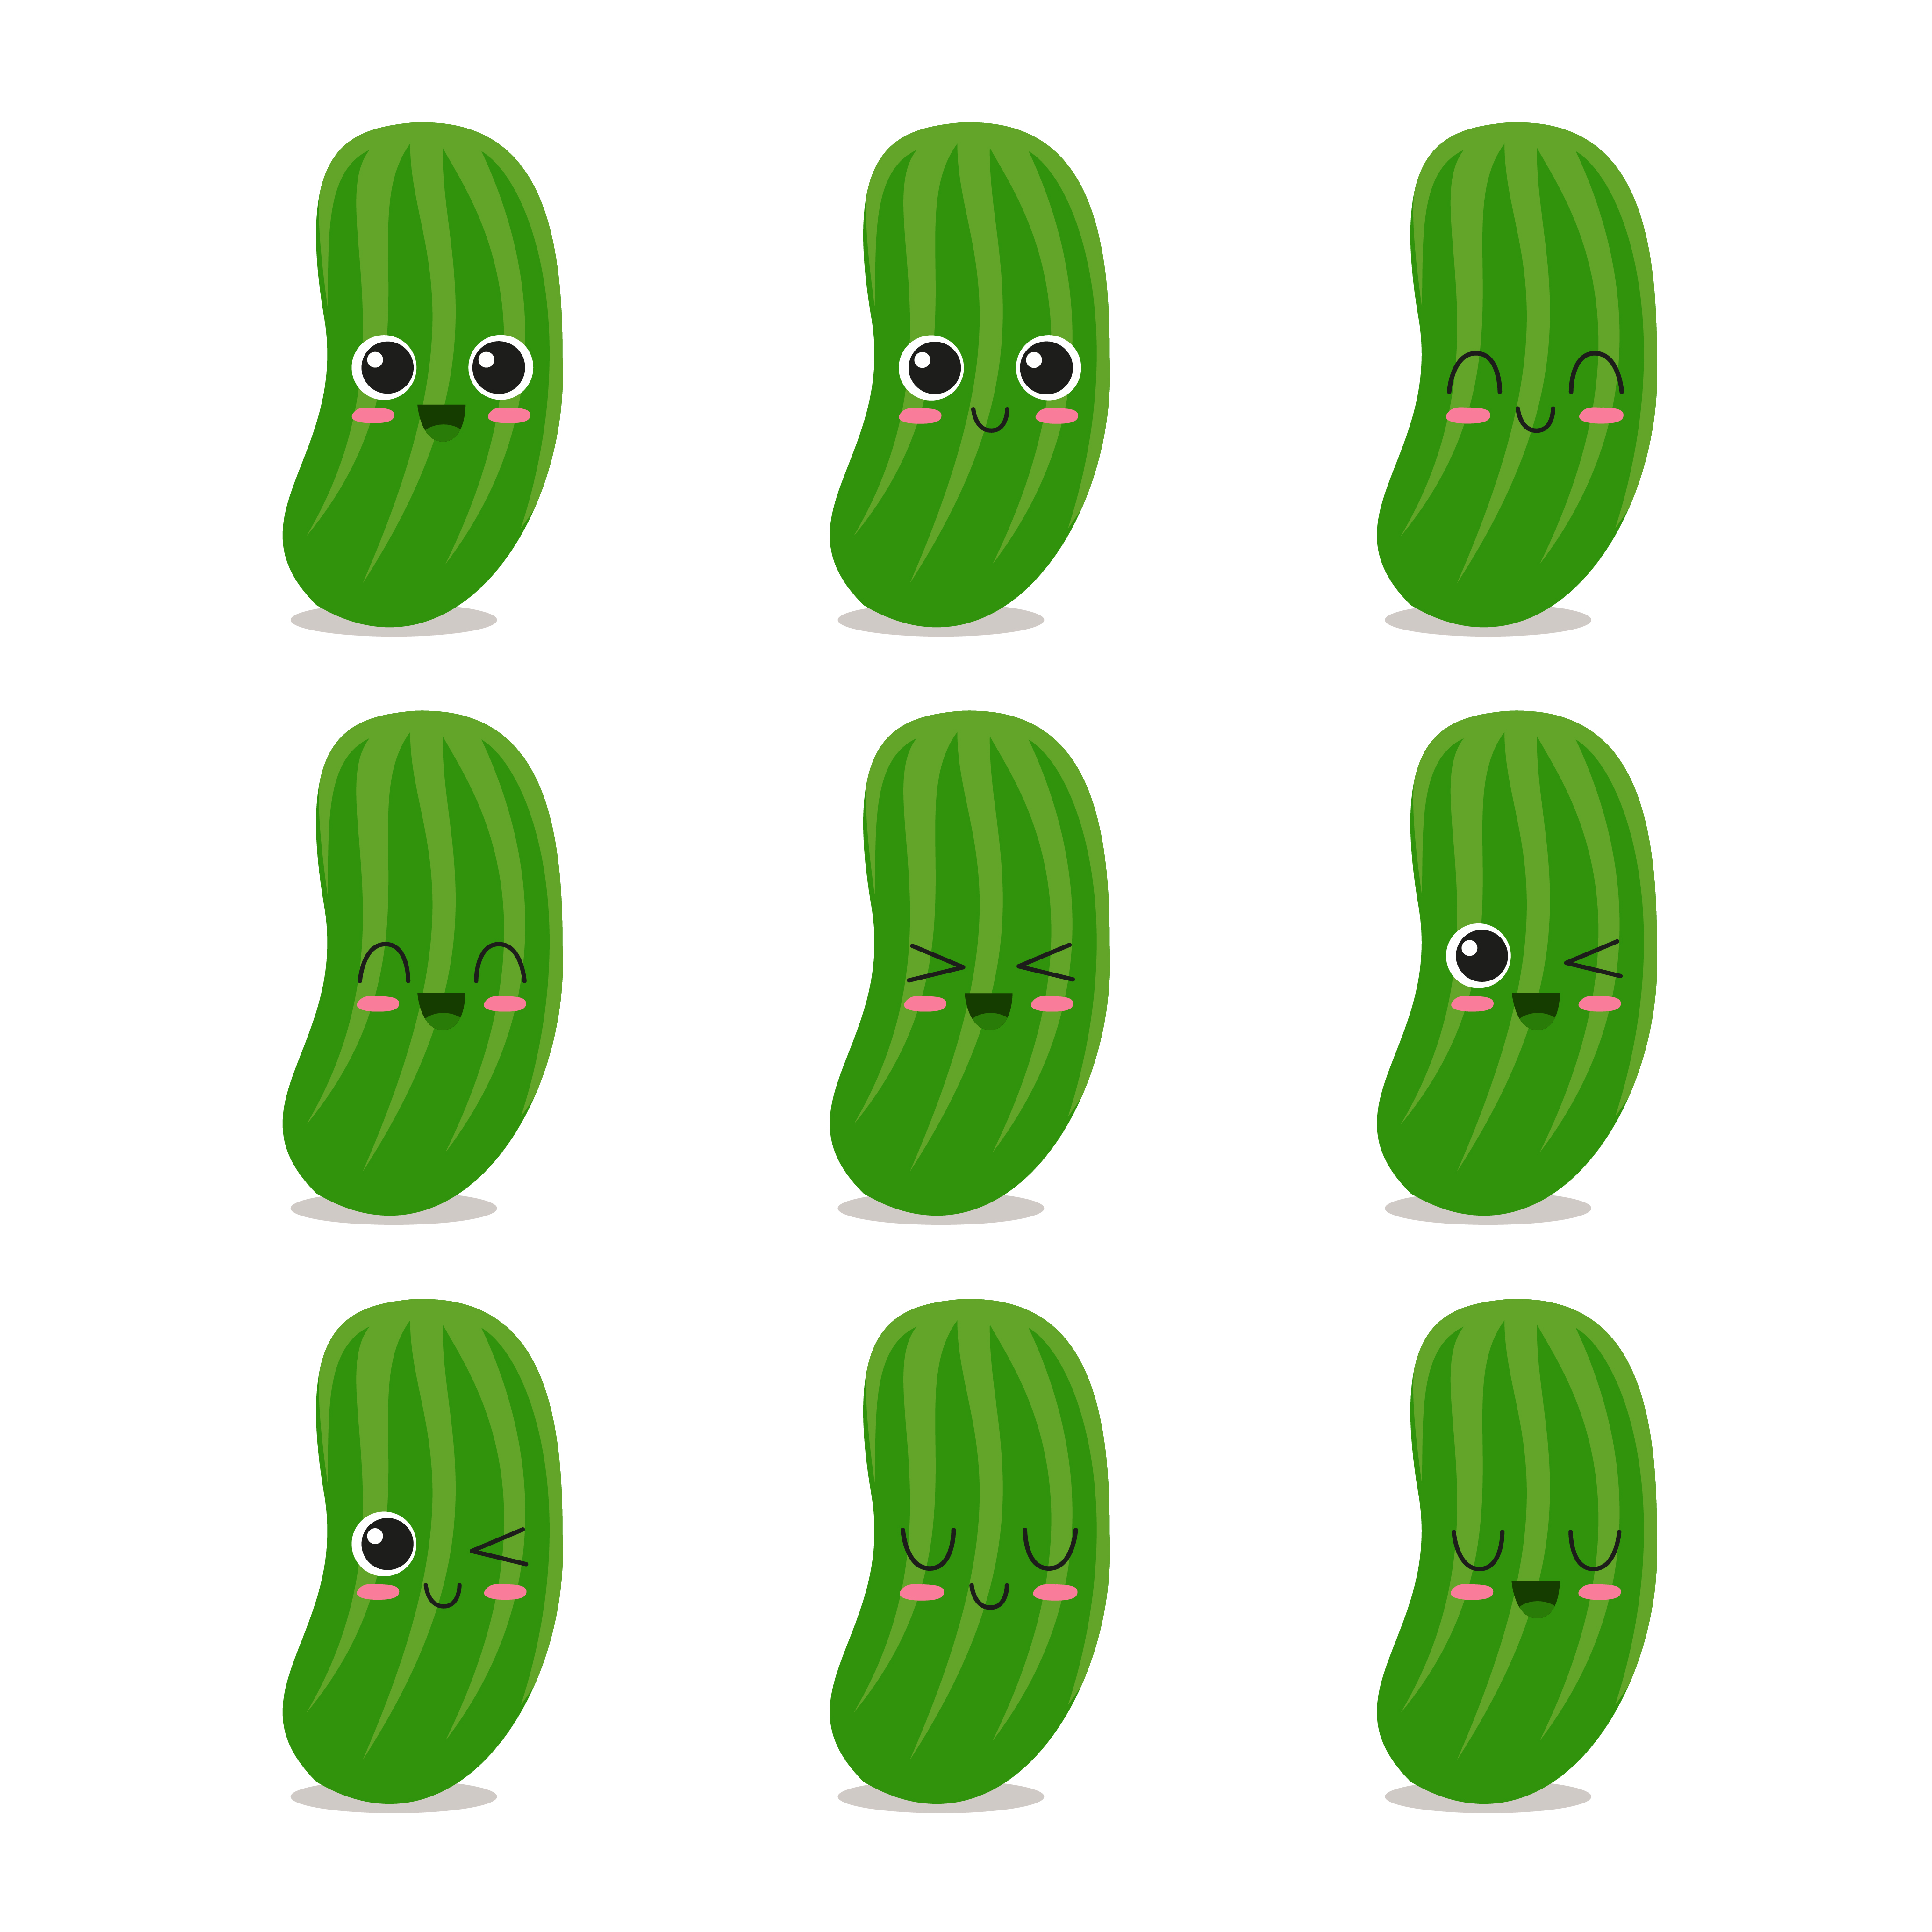 Download Cucumber character collection - Download Free Vectors ...